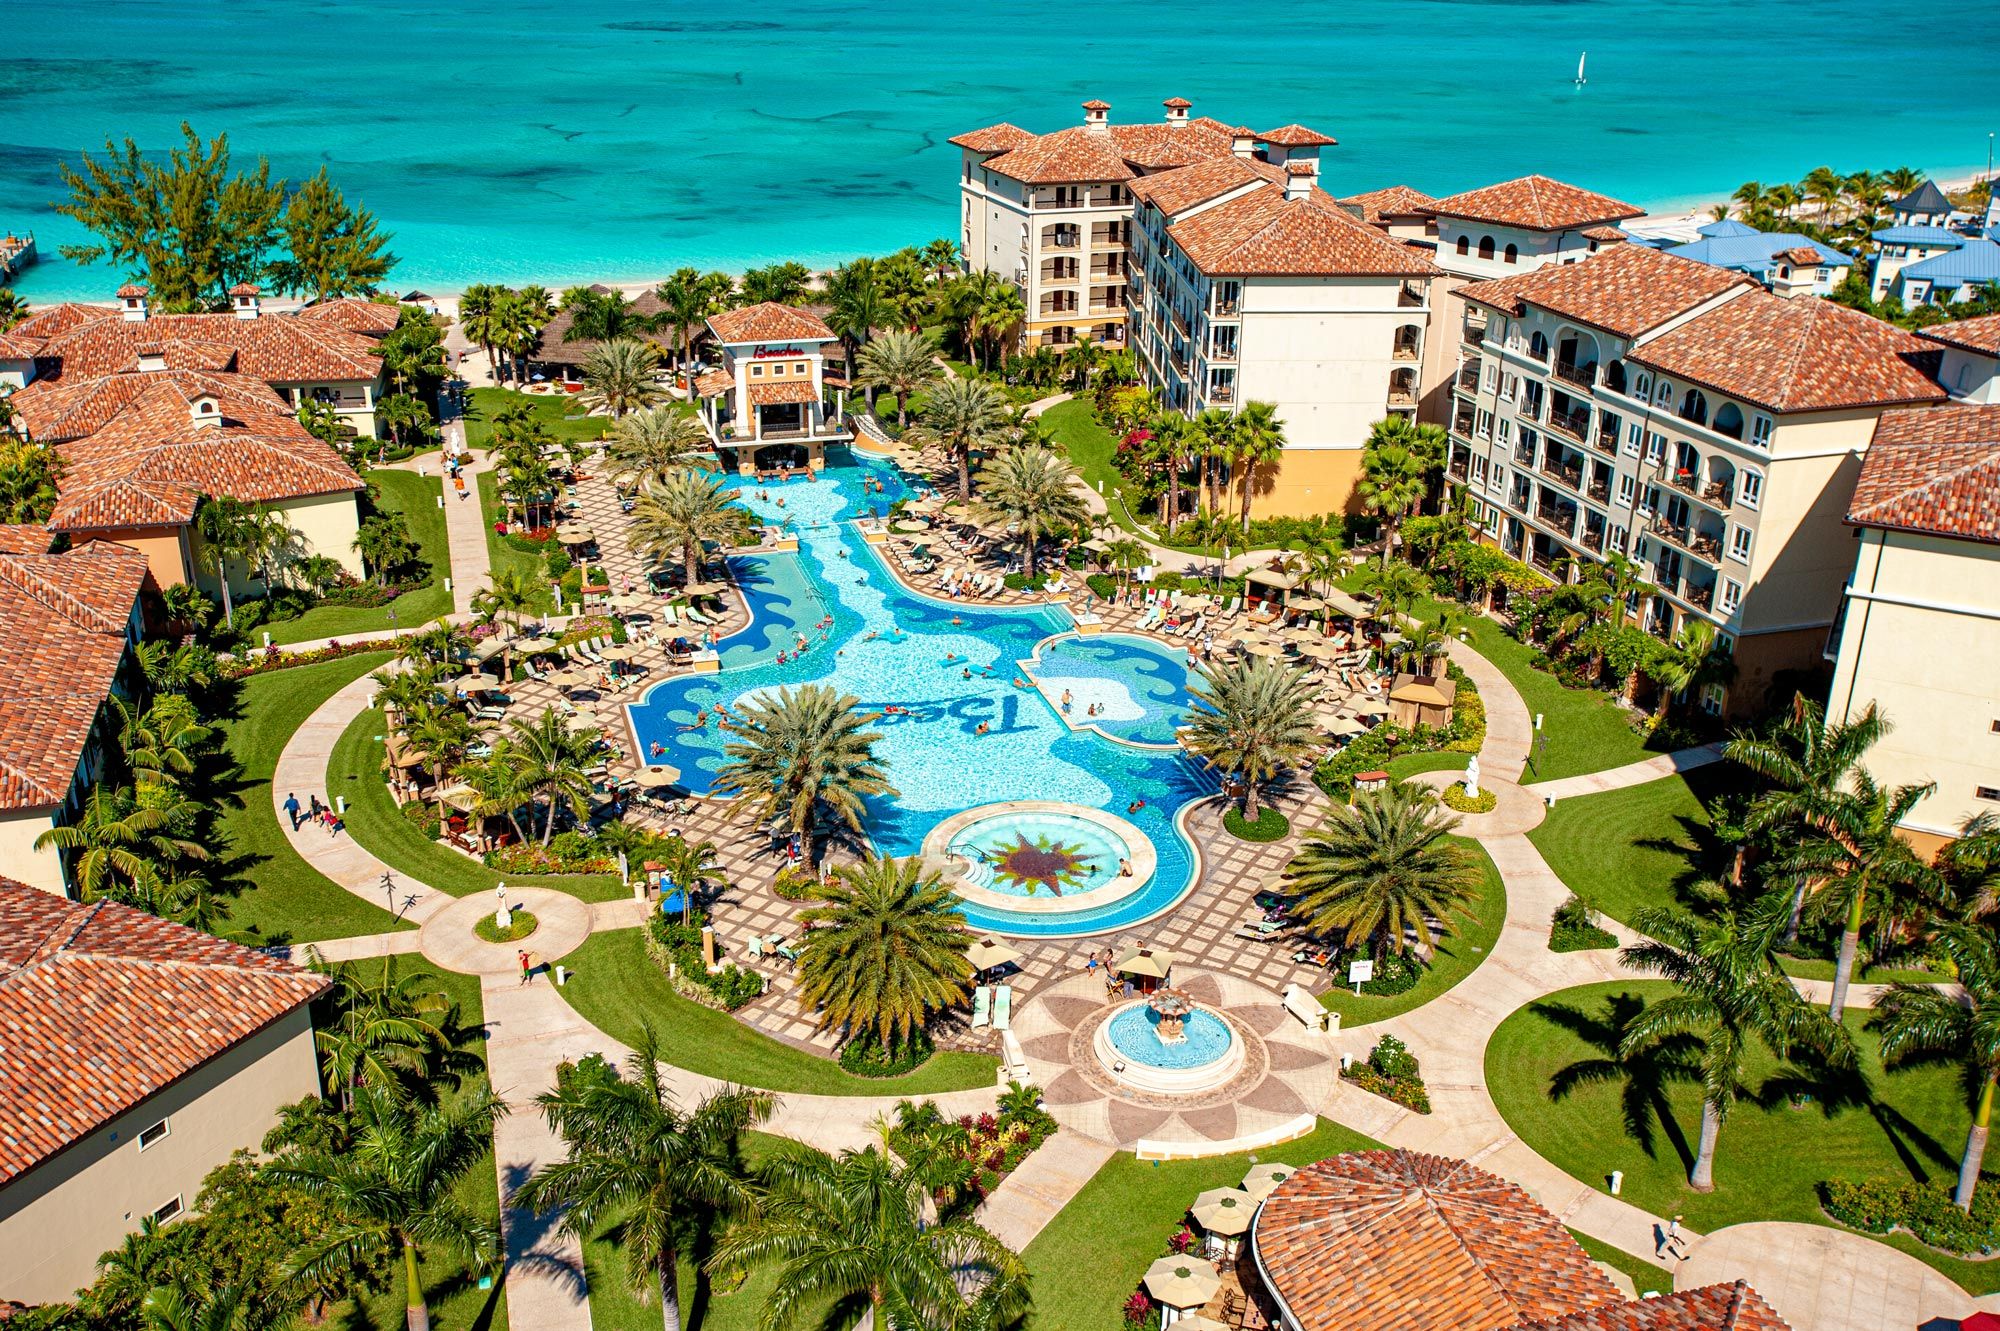 Beaches Turks and Caicos Resort Overview